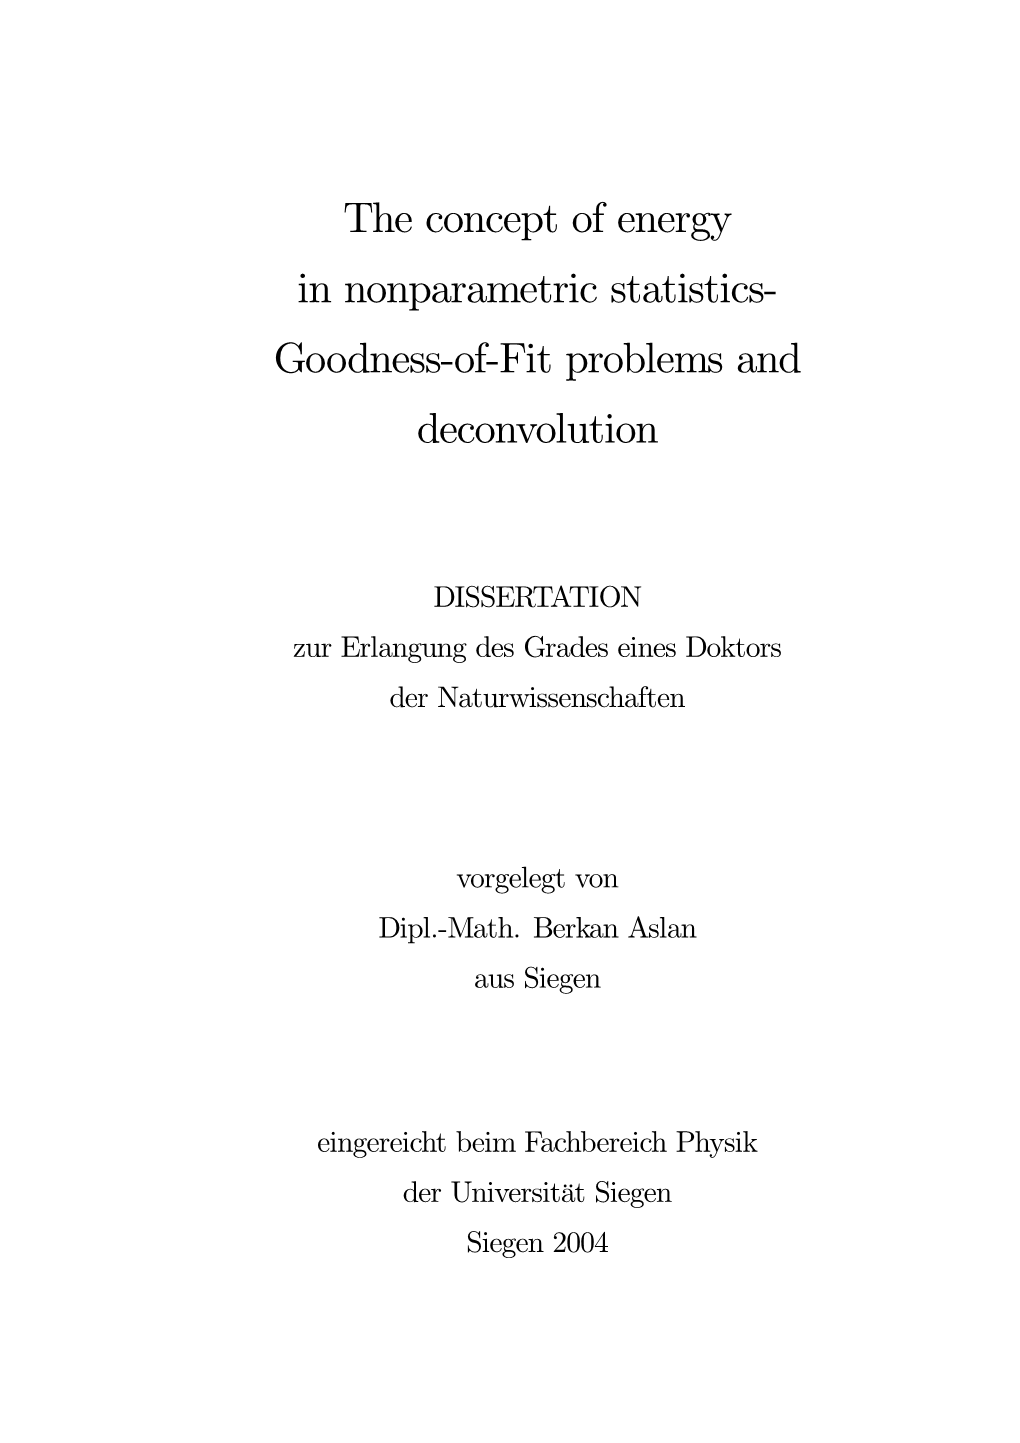 The Concept of Energy in Nonparametric Statistics- Goodness-Of-Fit Problems and Deconvolution